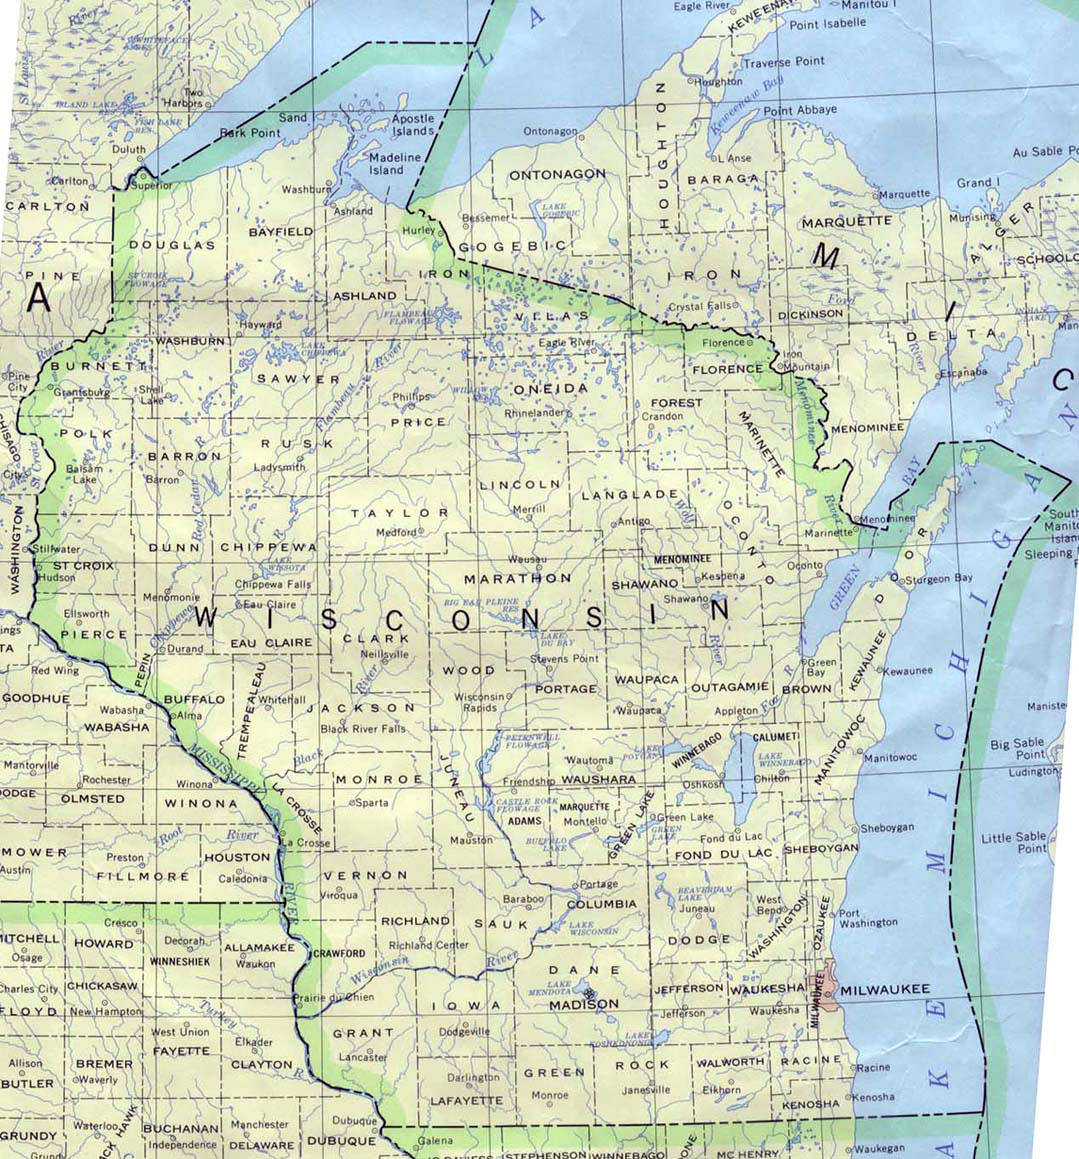 detailed-map-of-wisconsin-state-wisconsin-detailed-map-vidiani